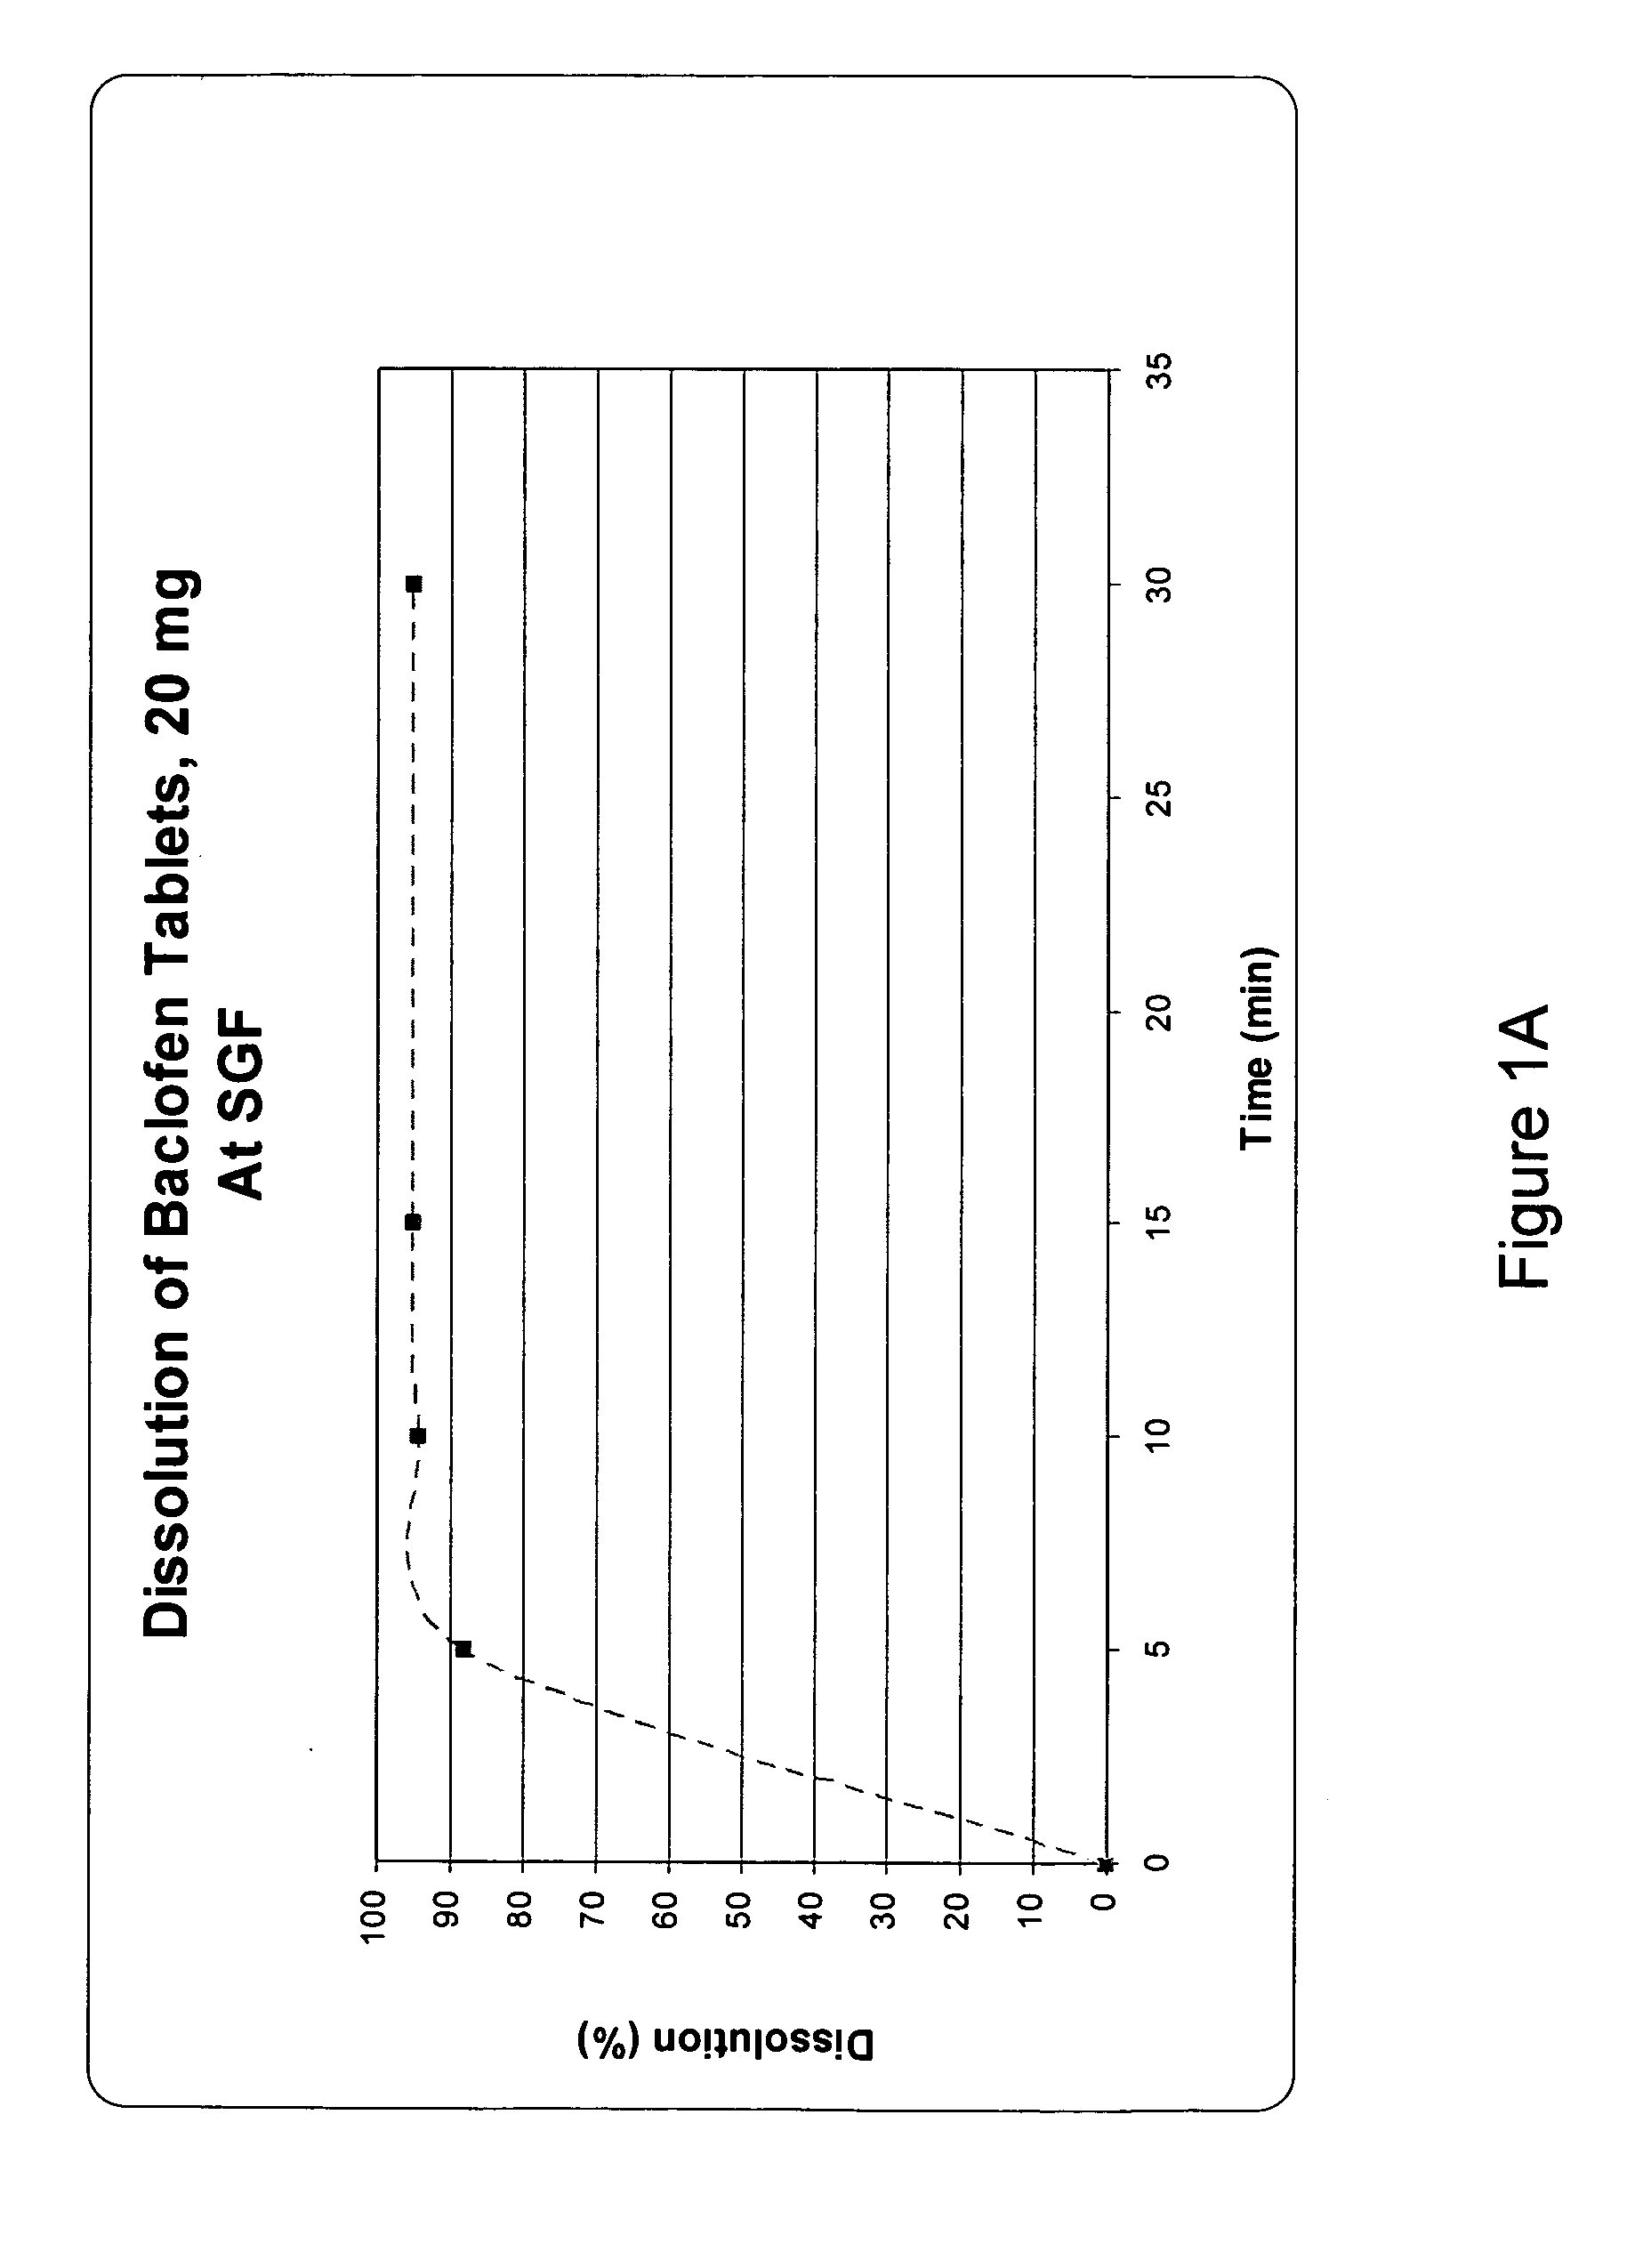 Pharmaceutical dosage forms having immediate and controlled release properties that contain a GABAB receptor agonist